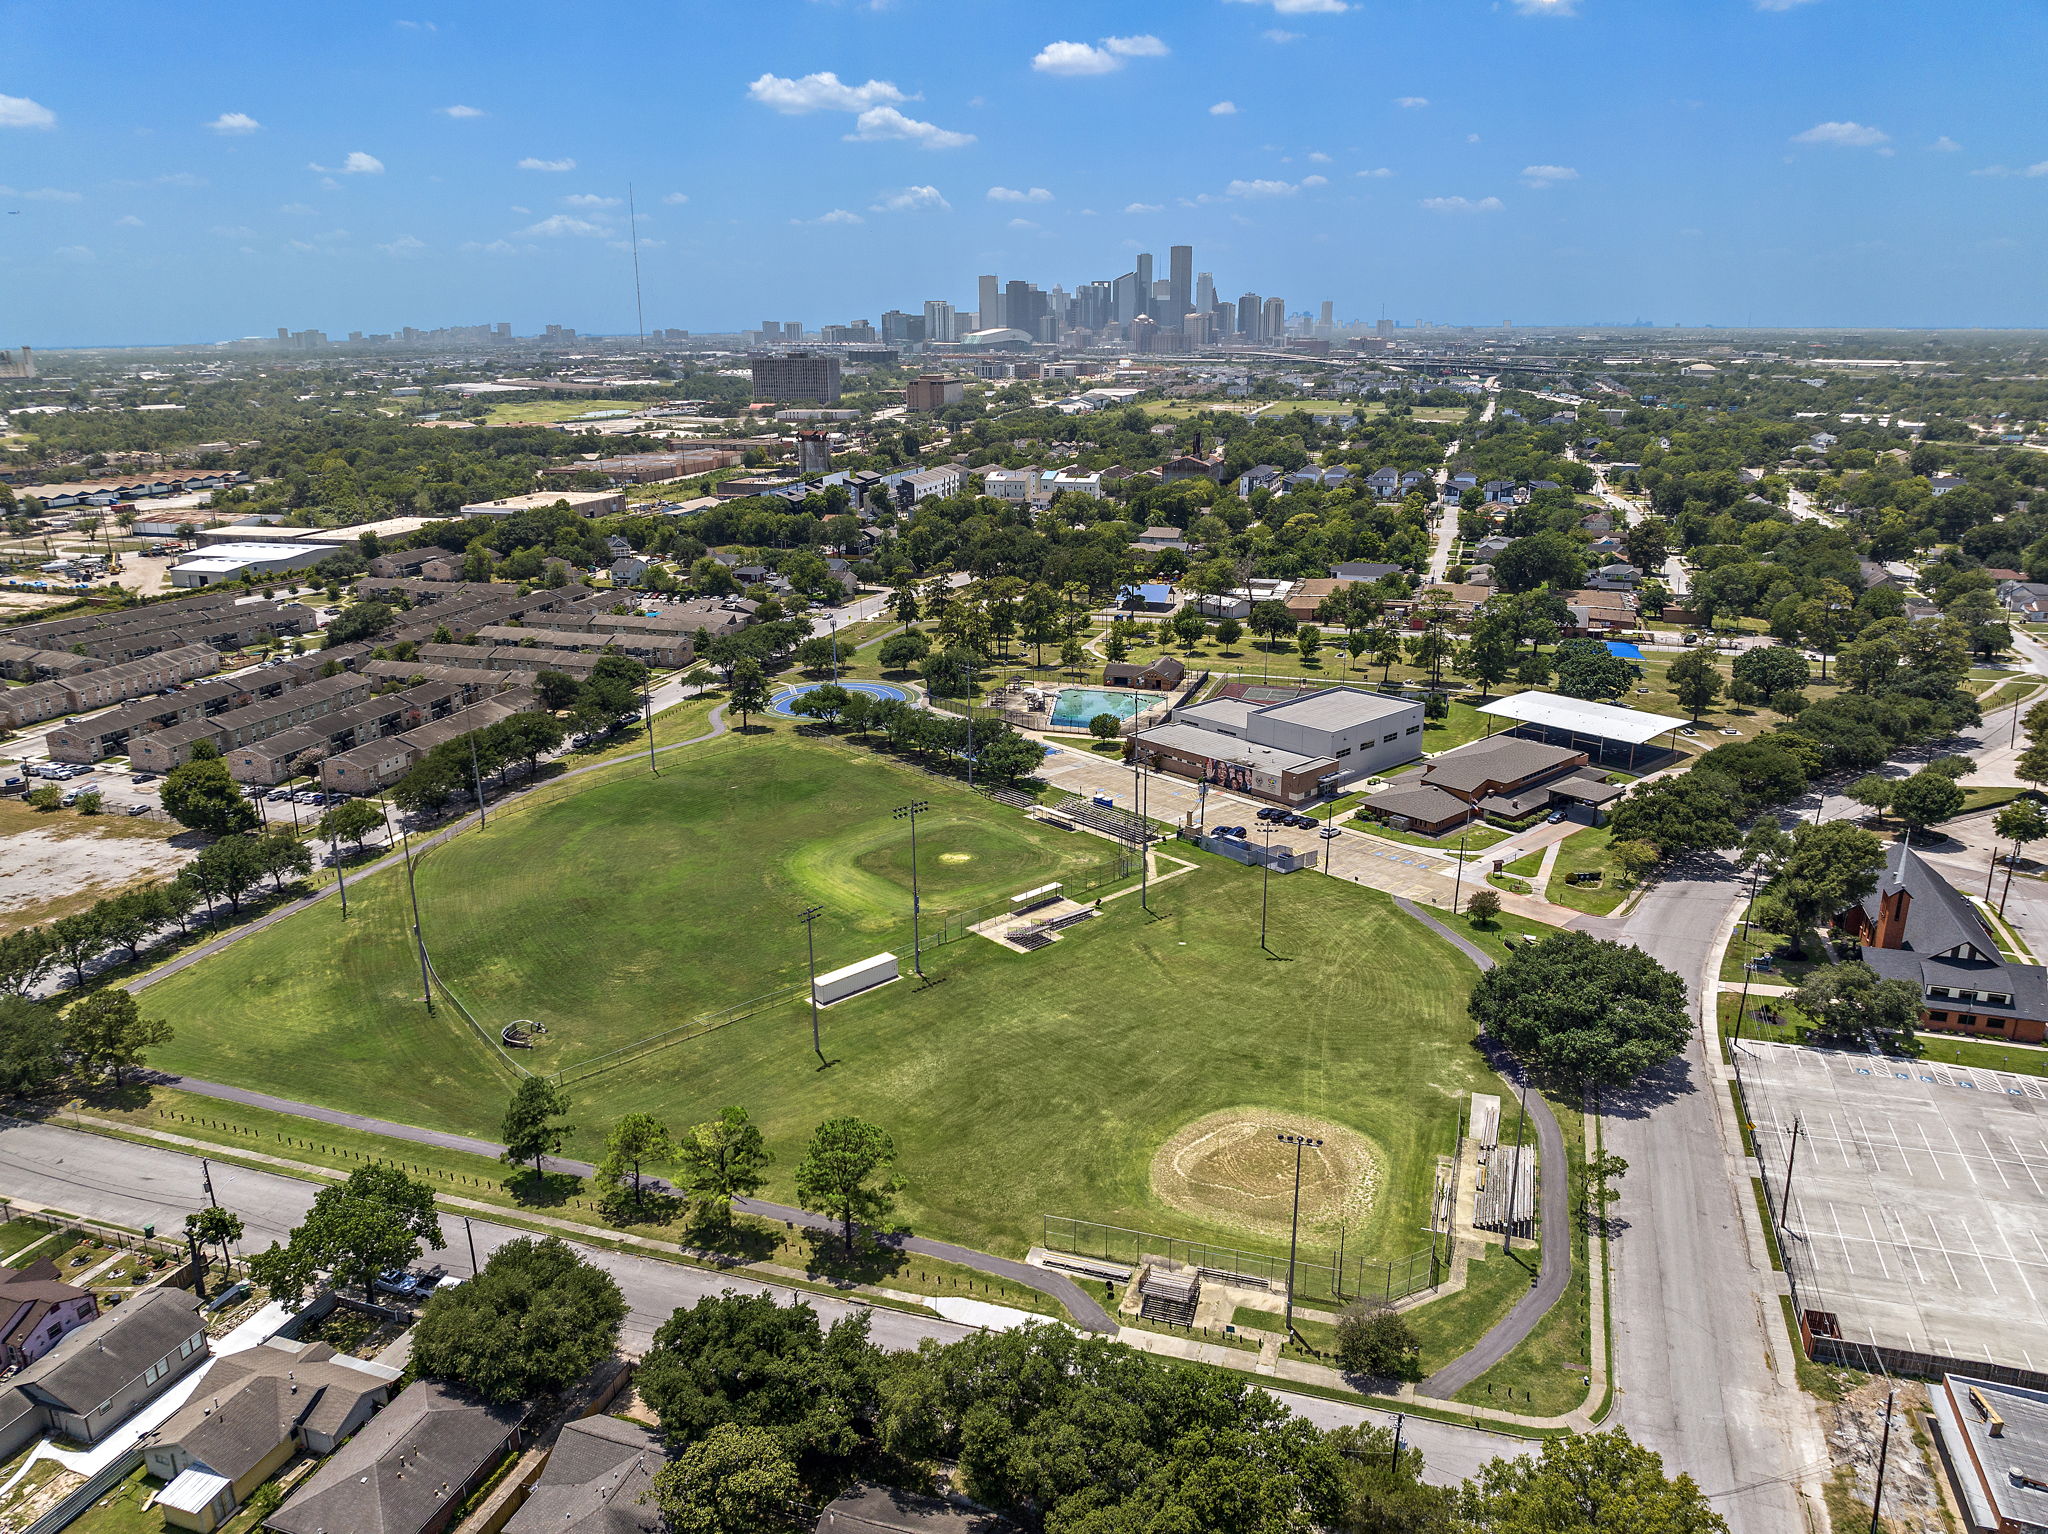 Aerial view of two baseball fields in Finnigan Park